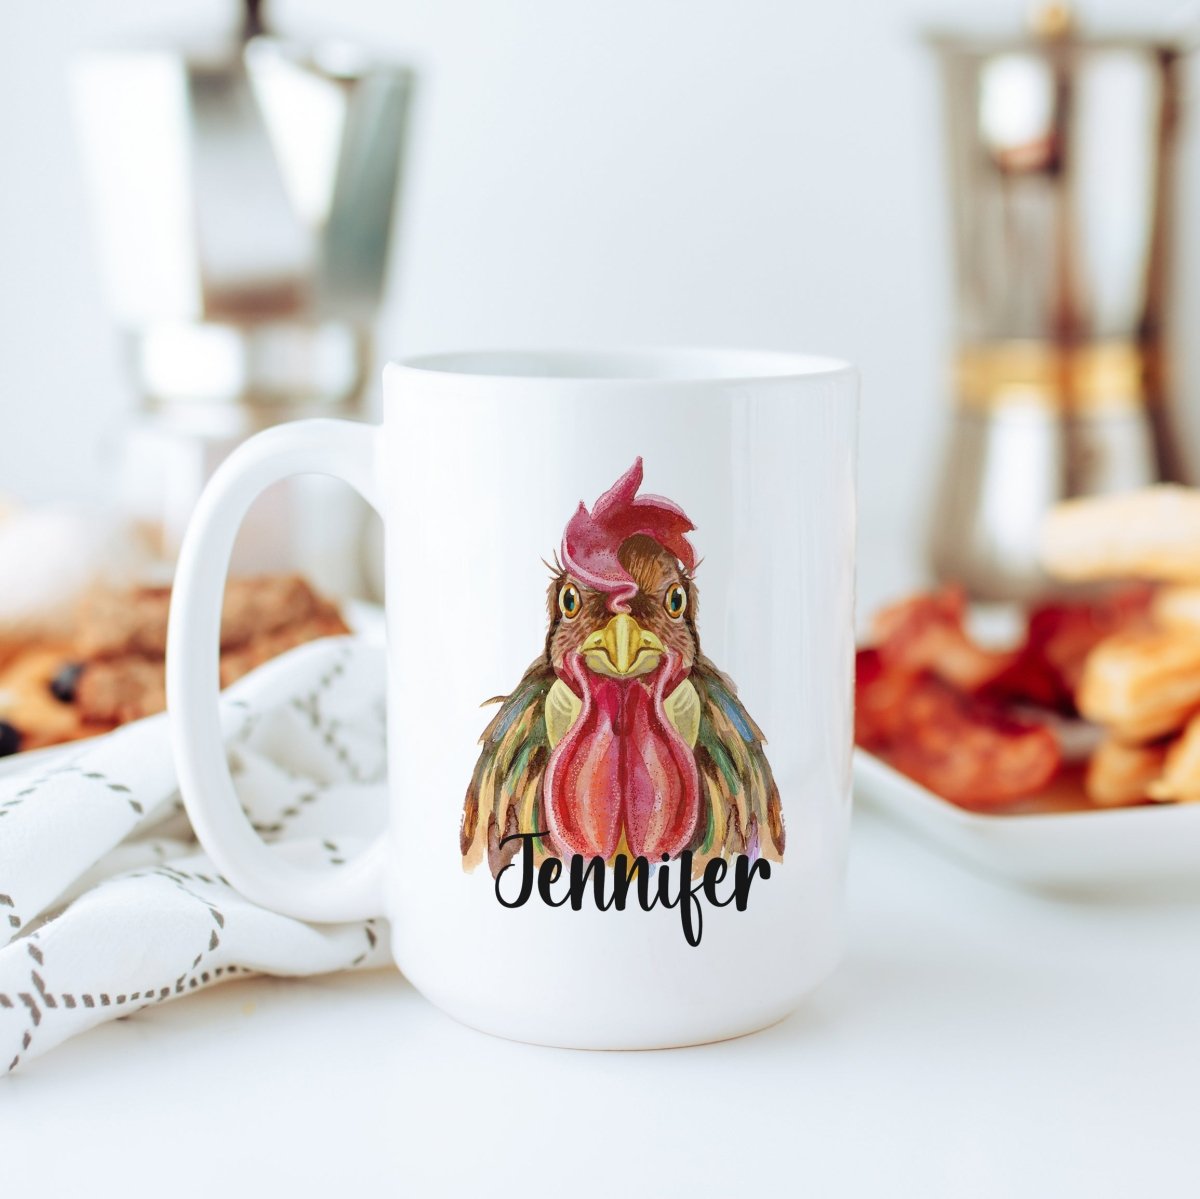 Personalized Watercolor Rooster Mug - Zookaboo